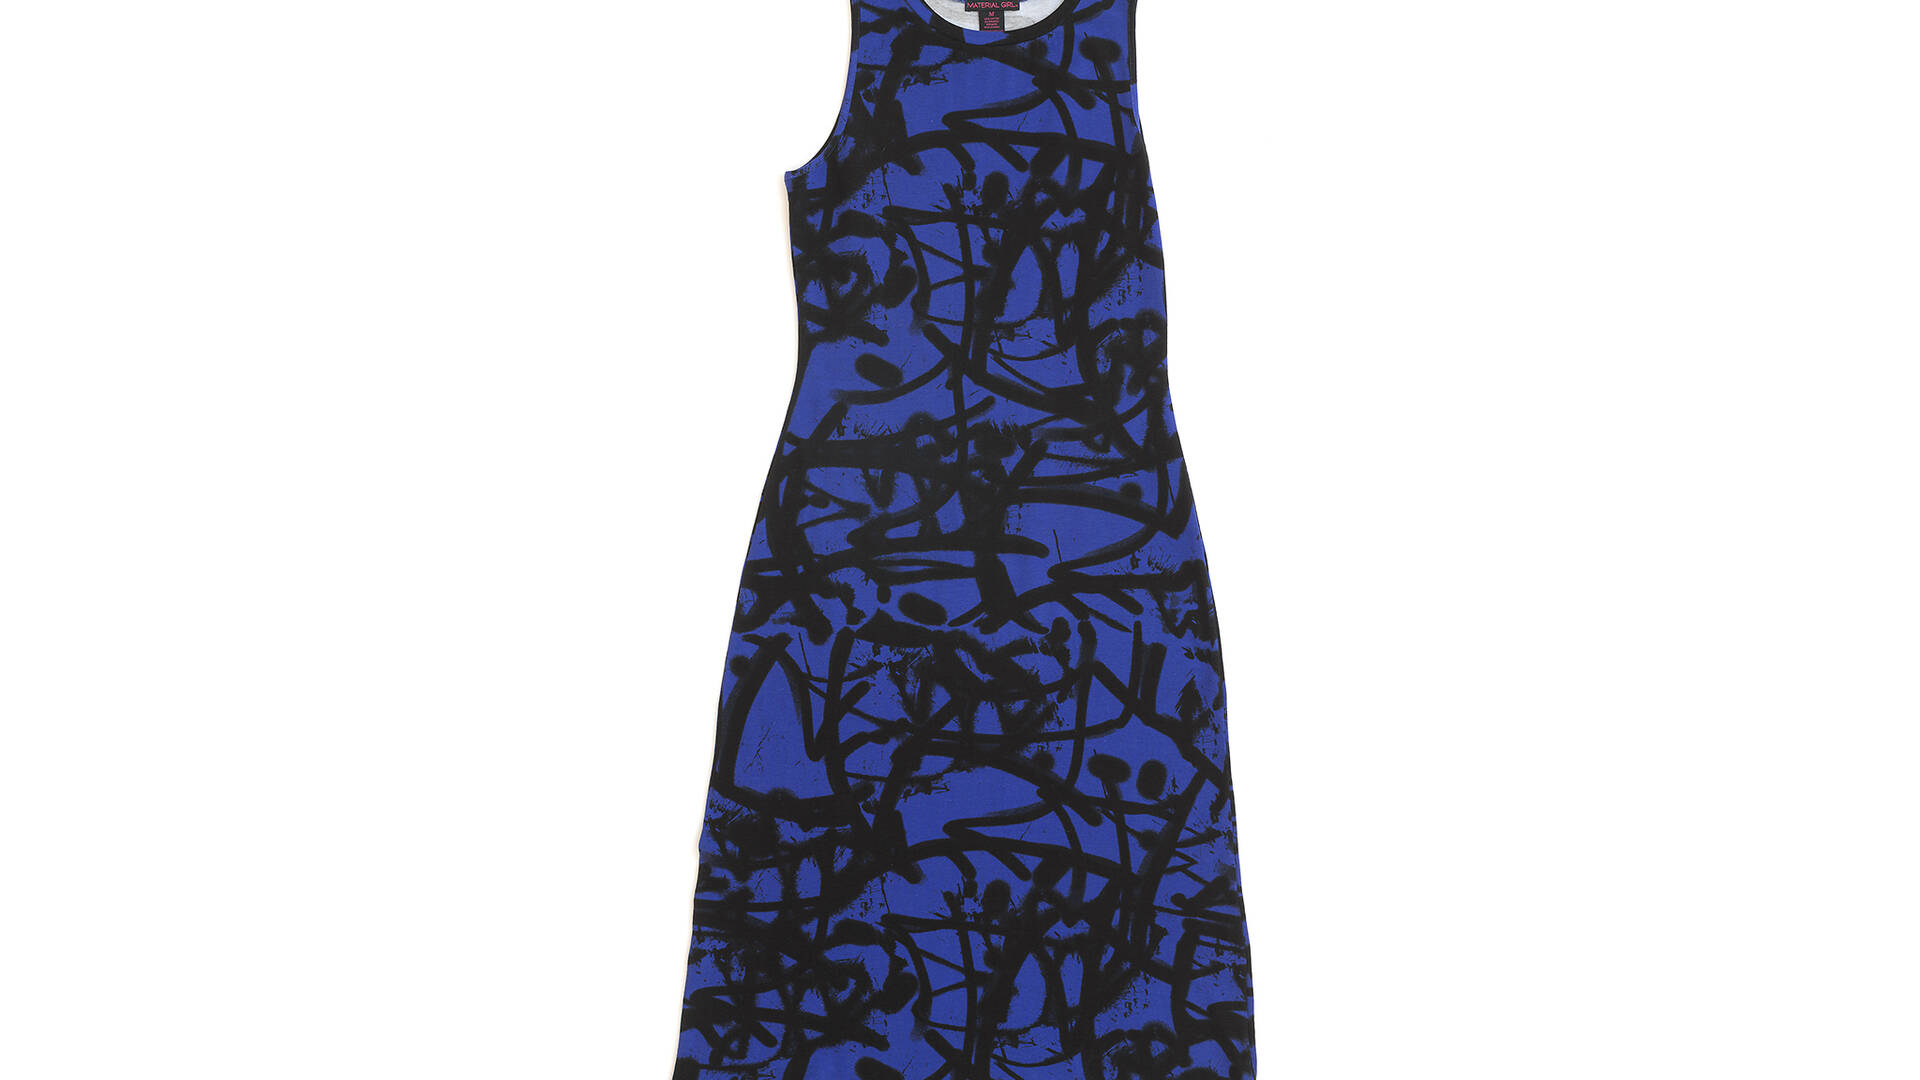 Best dresses for women fall 2013: Mini, maxi and party dresses